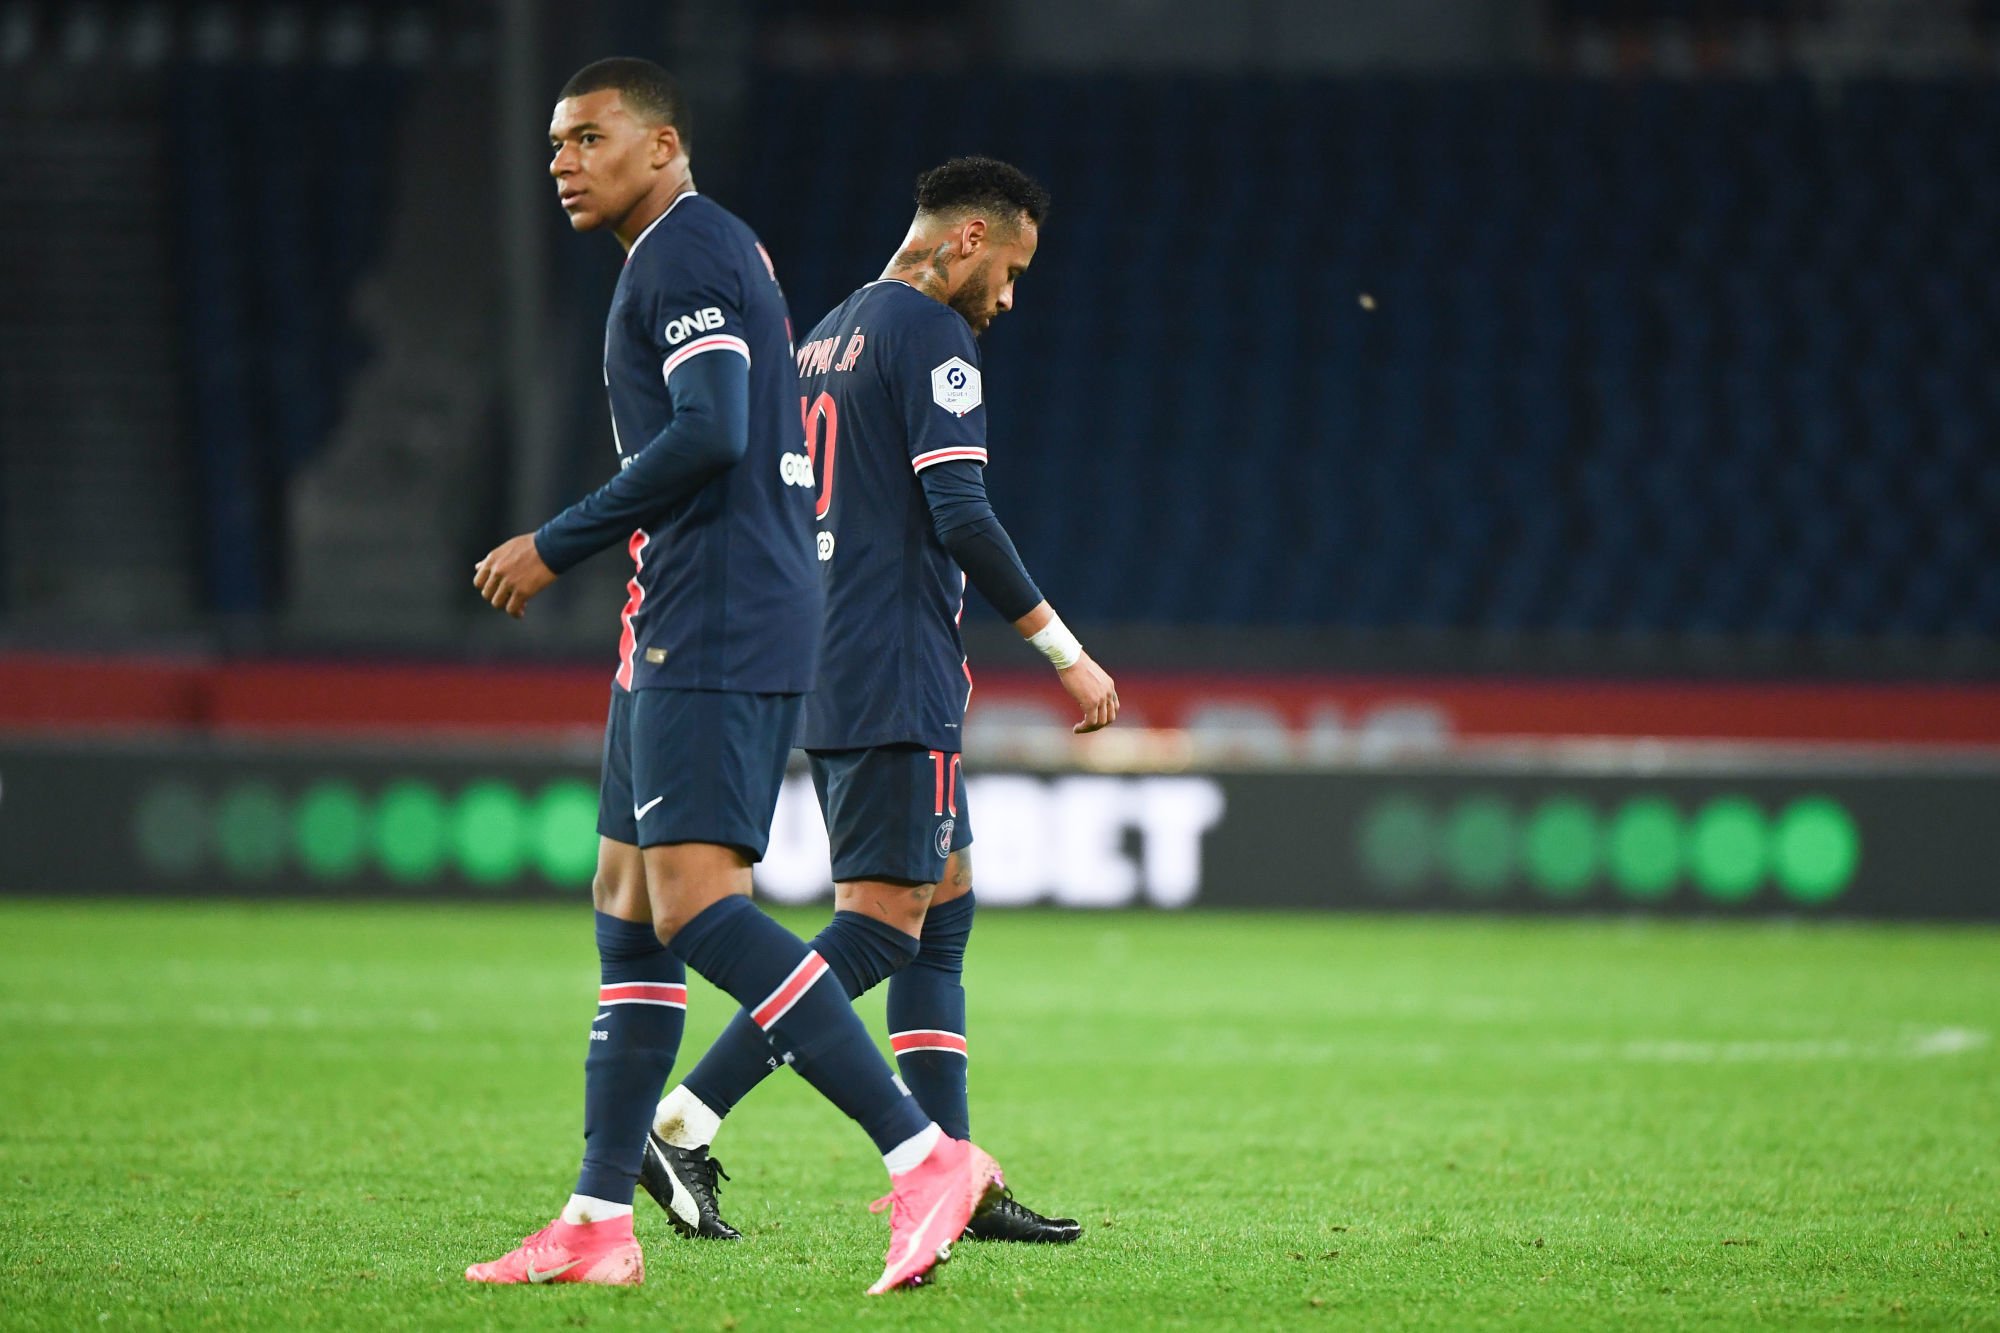 Kylian MBAPPE of PSG and NEYMAR JR of PSG during the Ligue 1 match between Paris Saint-Germain and Angers SCO at Parc des Princes on October 2, 2020 in Paris, France. (Photo by Anthony Dibon/Icon Sport) - NEYMAR JR - Kylian MBAPPE - Parc des Princes - Paris (France)